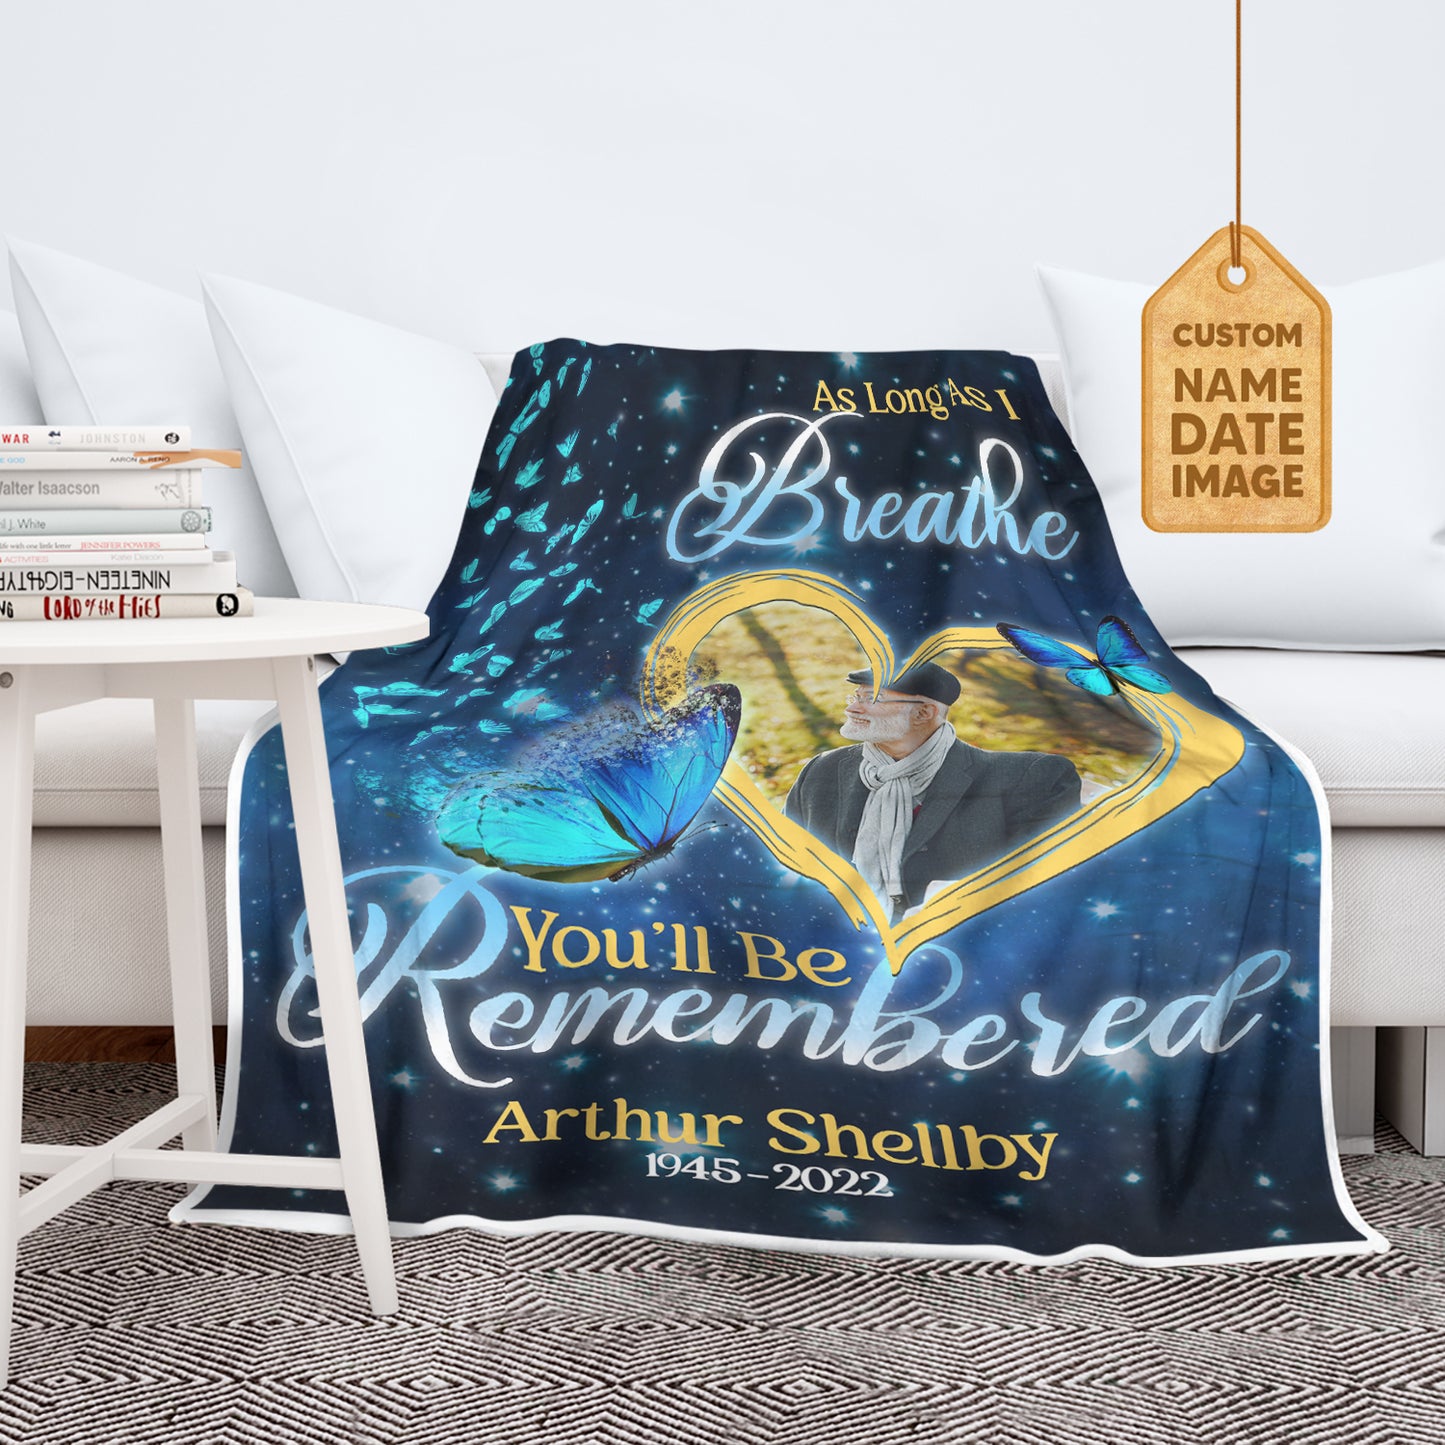 As Long As I Breath You'll Be Remembered Butterfly Heart Fleece Blanket